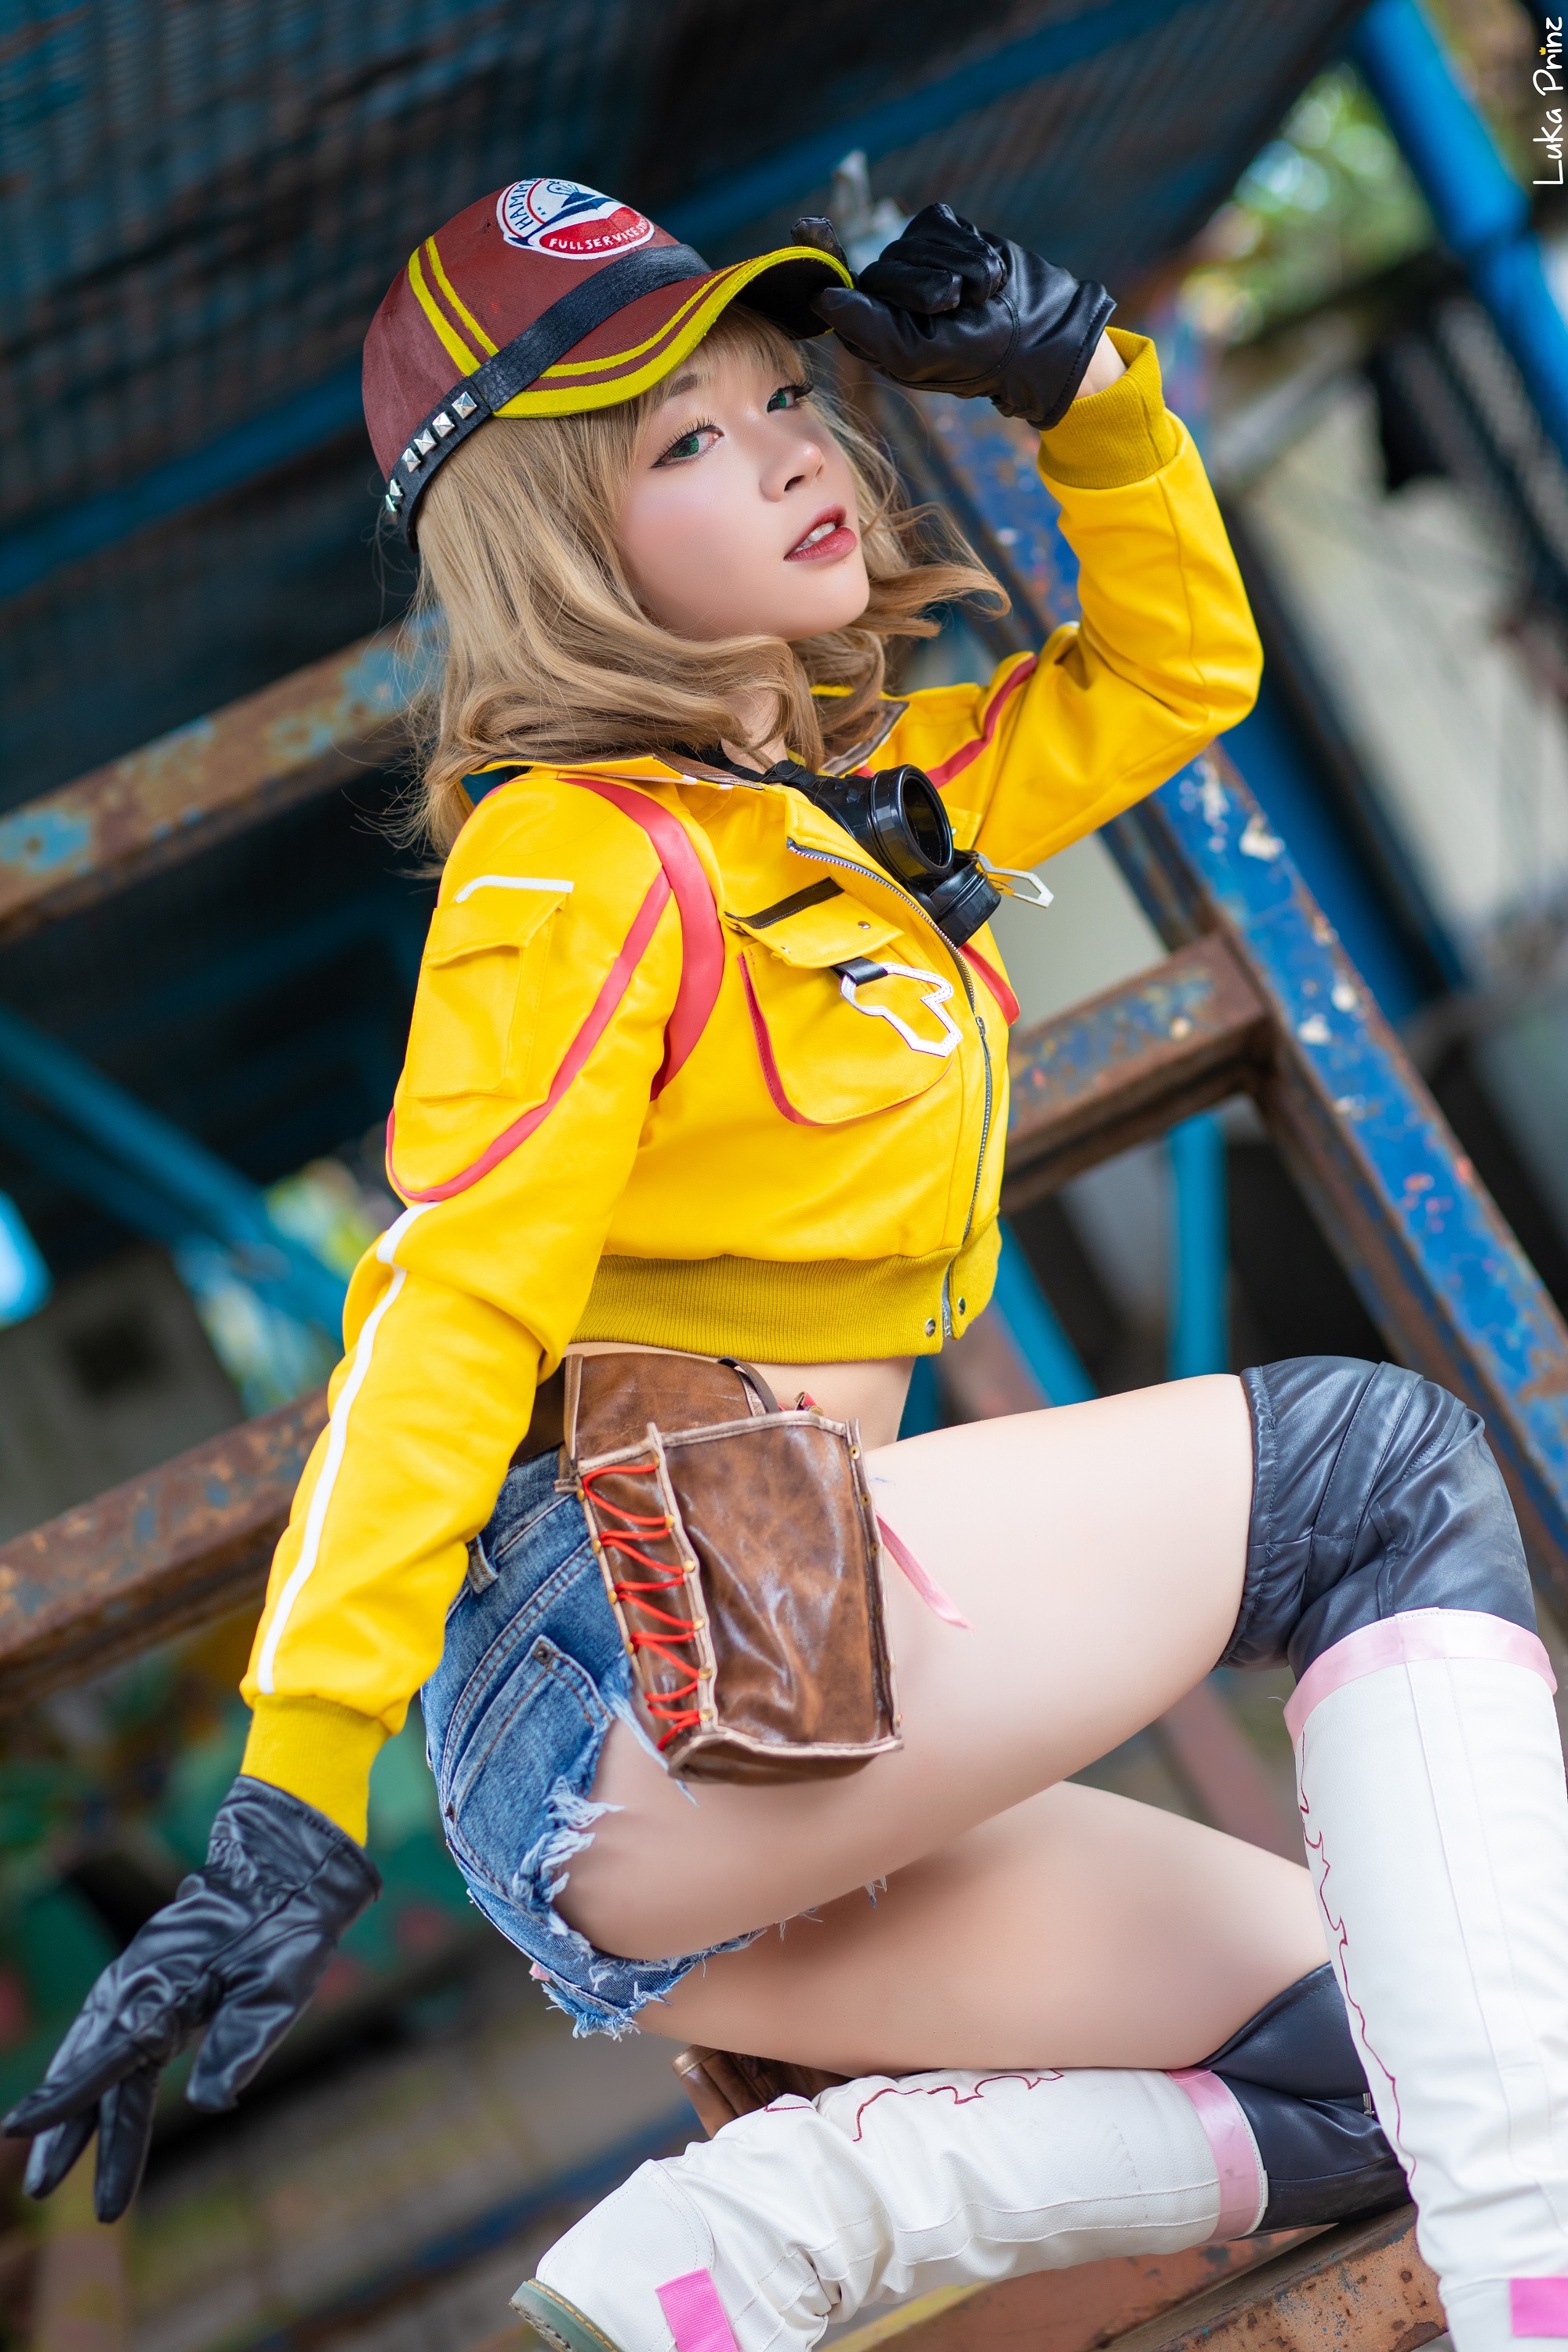 People 2000x3000 women model blonde Asian asian cosplayer cosplay Final Fantasy Final Fantasy XV video games video game characters video game girls baseball cap goggles jacket yellow jacket zipper belly belt jean shorts high waisted shorts denim ass kneeling knee-high boots gloves black gloves green eyes looking at viewer depth of field outdoors women outdoors side view portrait display Cindy Aurum